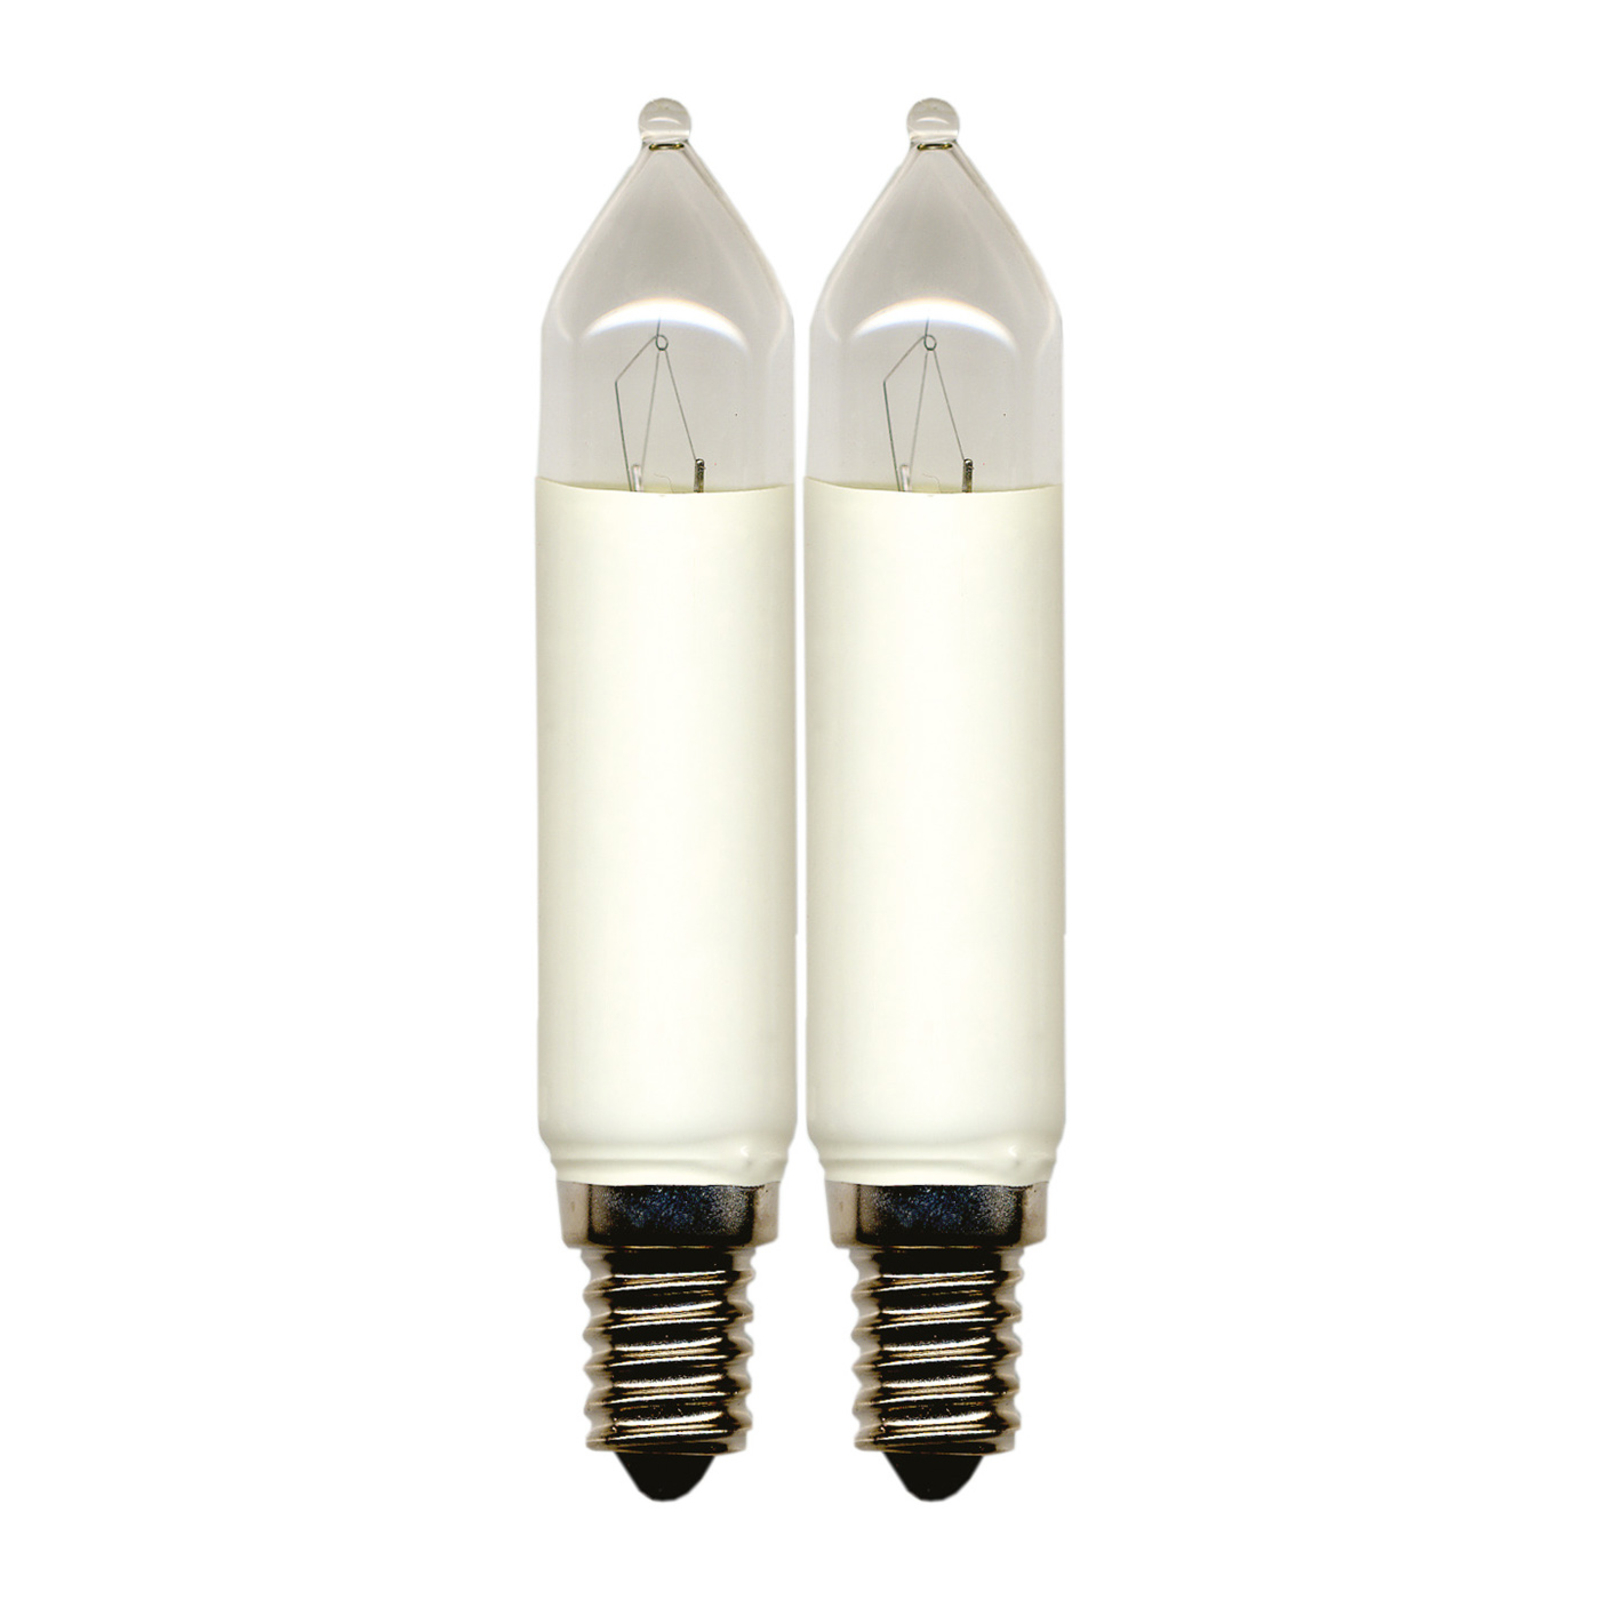 Replacement bulb E14 7 W 14 V set of 2